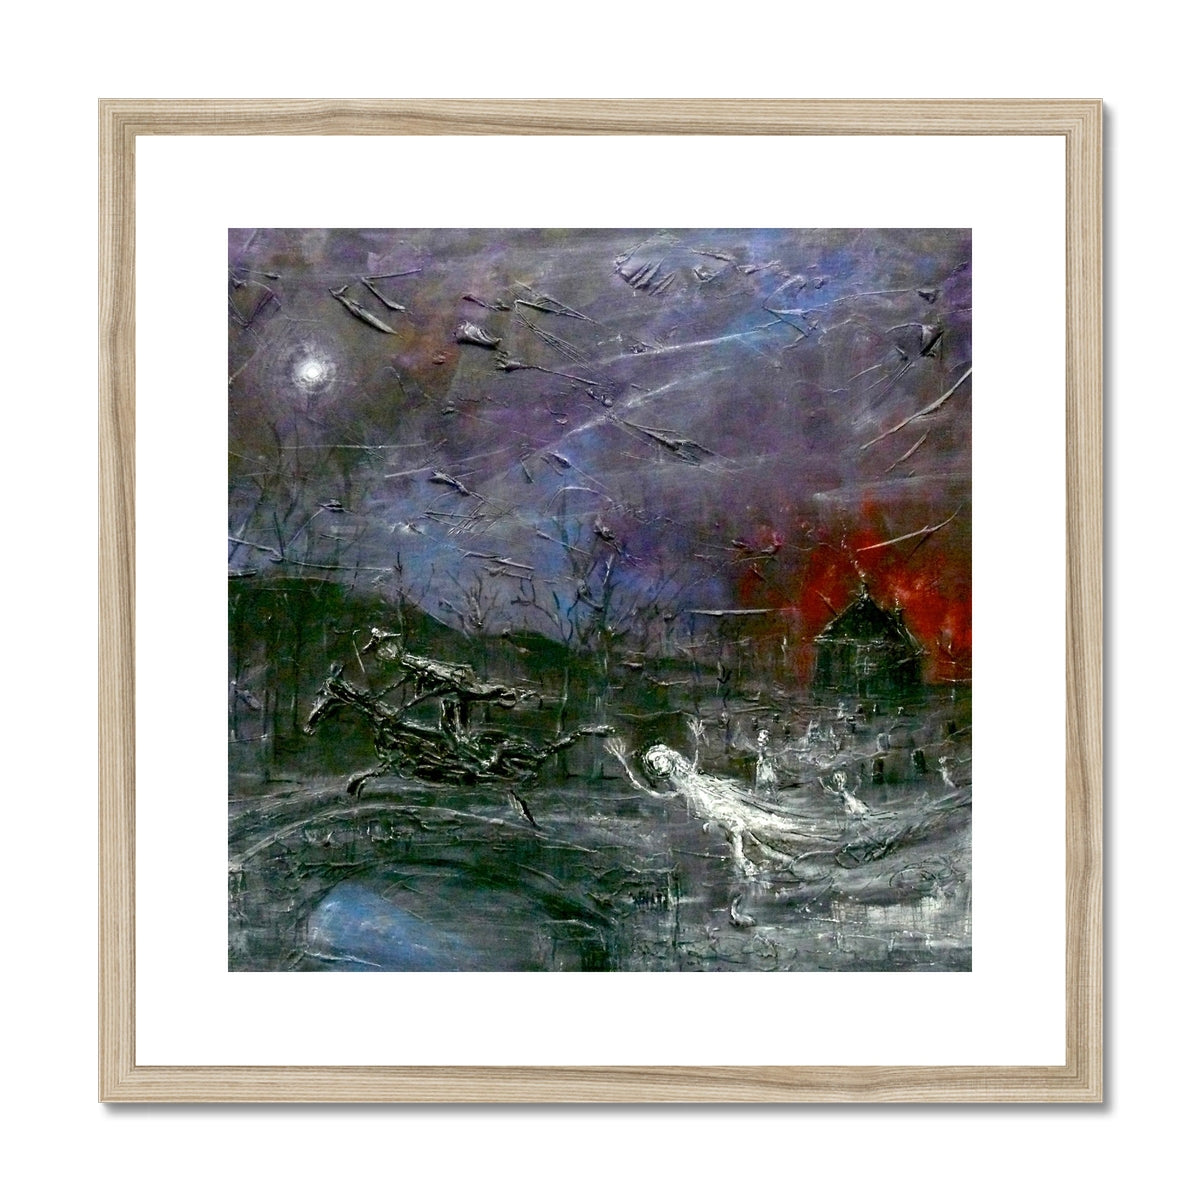 Tam O Shanter Painting | Framed & Mounted Prints From Scotland-Framed & Mounted Prints-Abstract & Impressionistic Art Gallery-20"x20"-Natural Frame-Paintings, Prints, Homeware, Art Gifts From Scotland By Scottish Artist Kevin Hunter